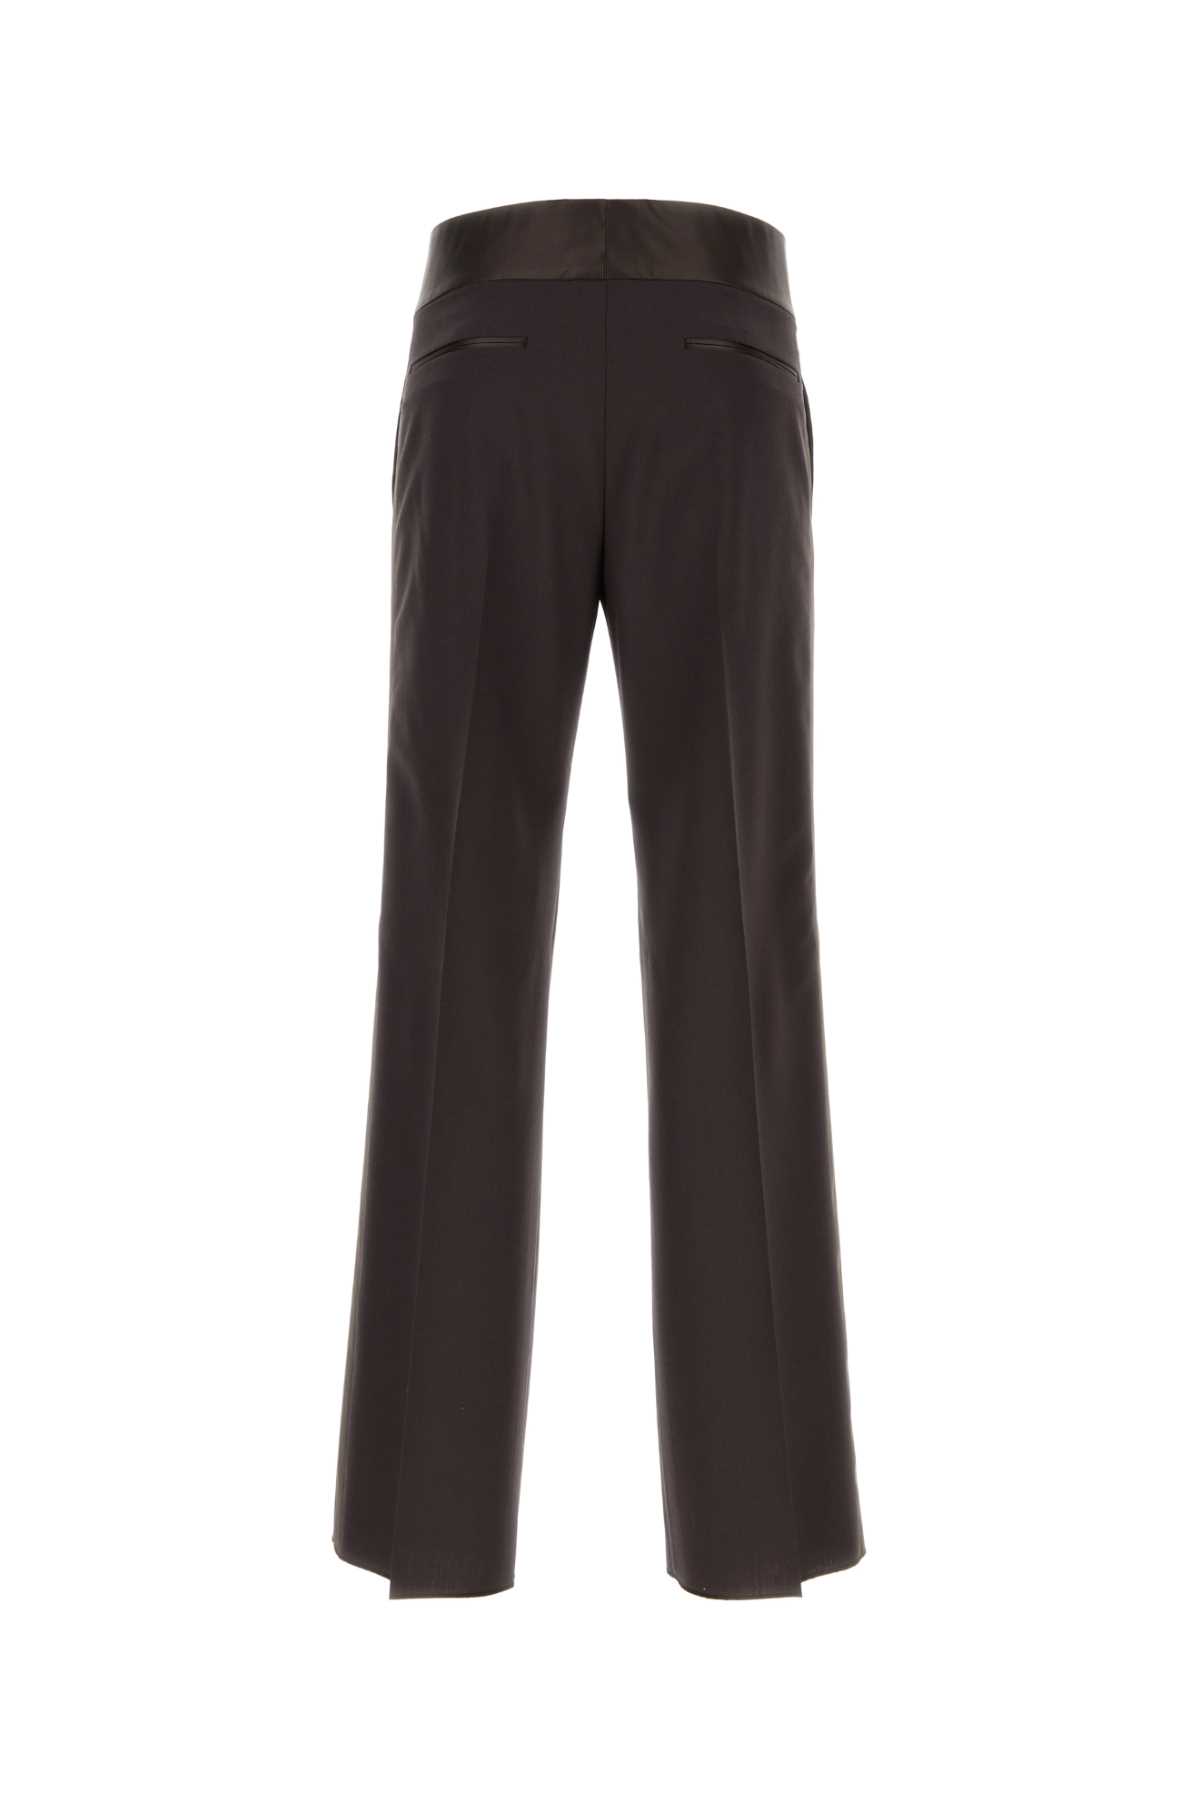 Valentino Chocolate Wool Trouser In Brown